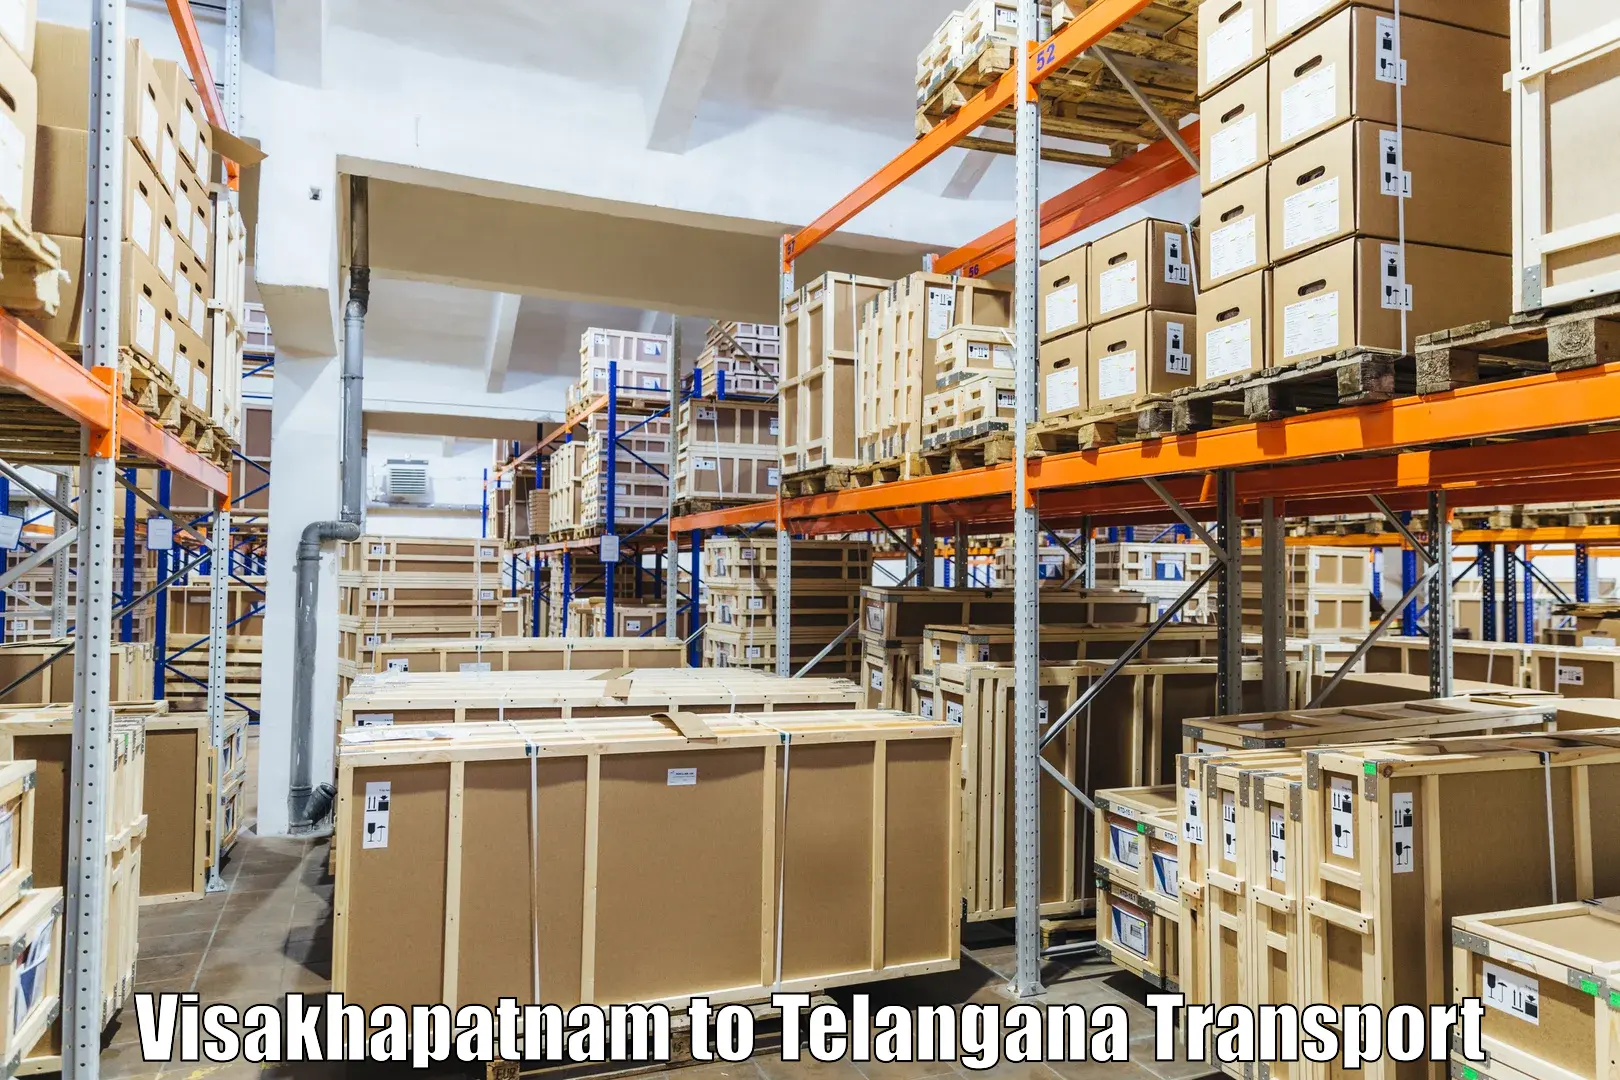 Online transport service Visakhapatnam to Bachupally